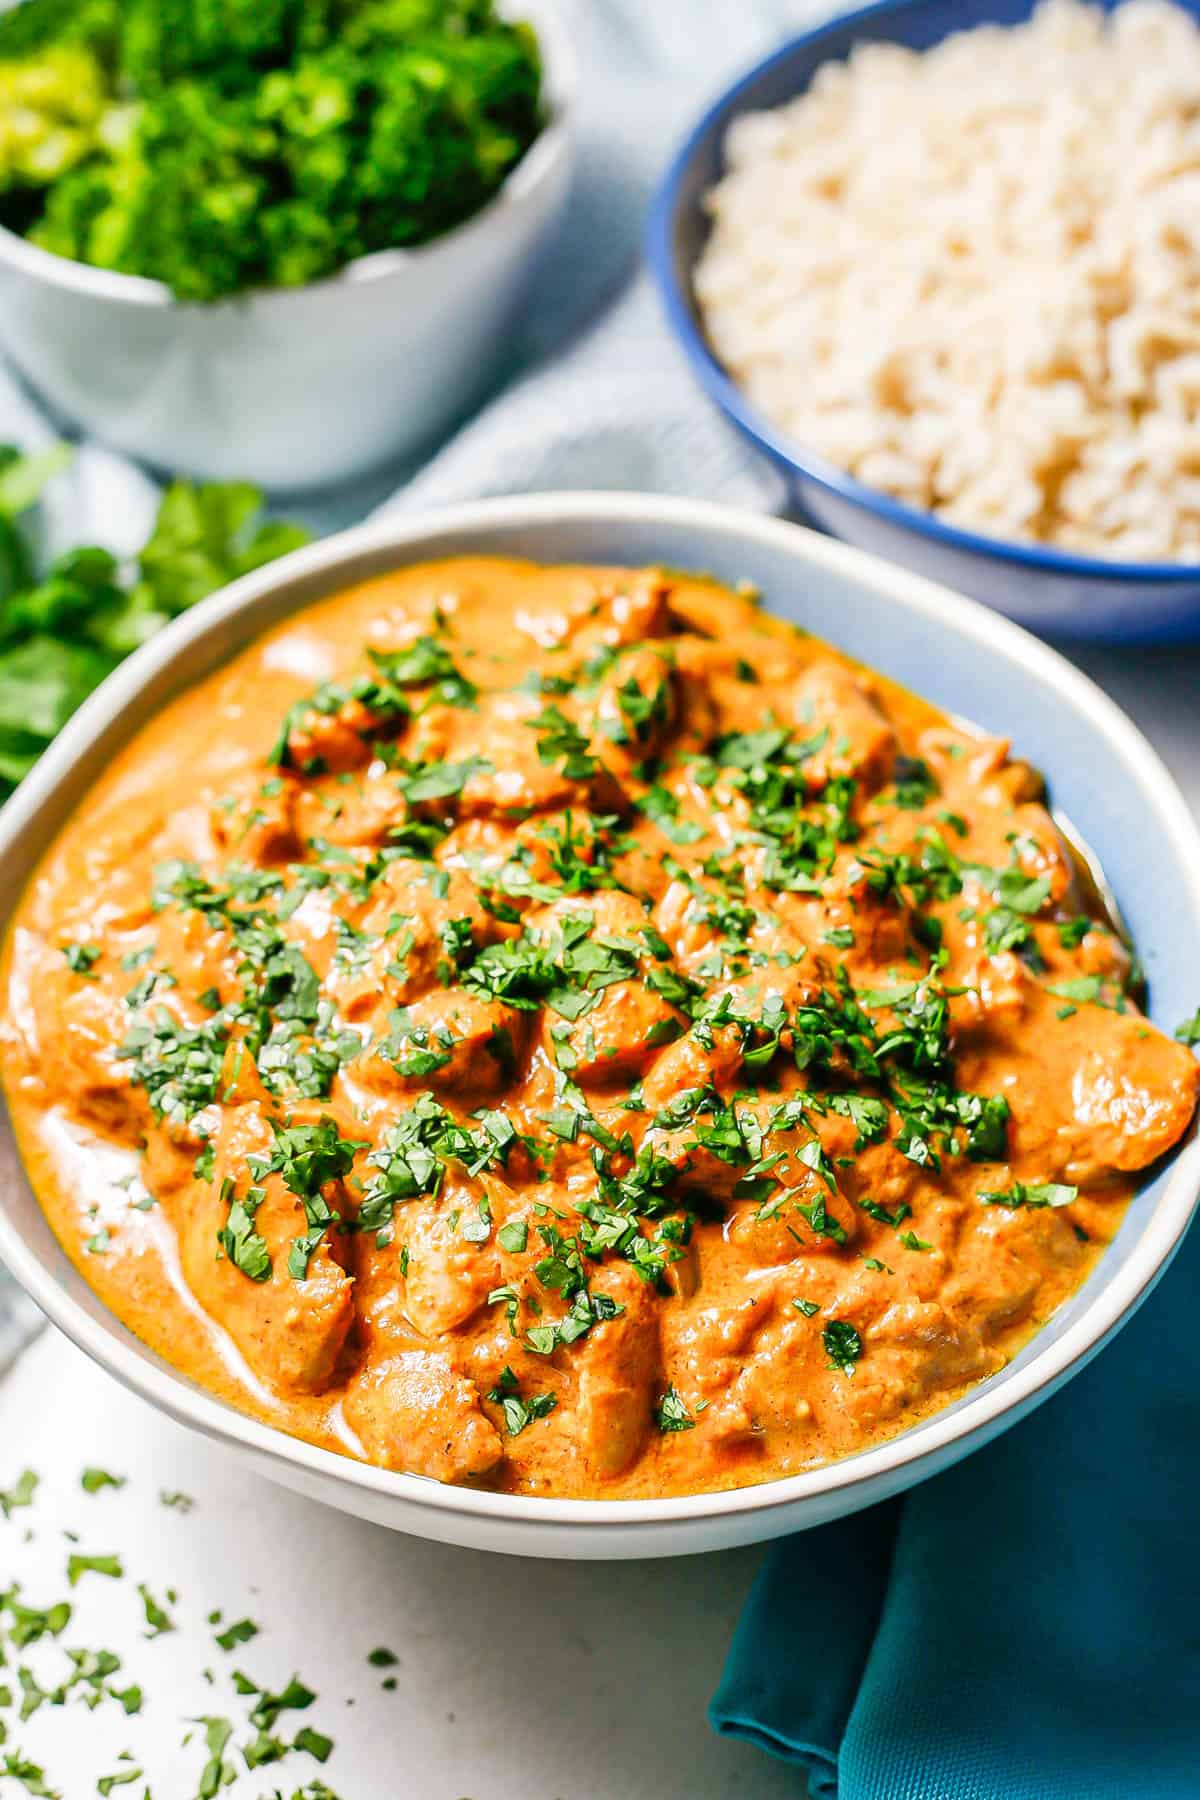 Slow cooker butter chicken served in a blue and white bowl and sprinkled with parsley, with bowls of rice and steamed broccoli in the backgorund.